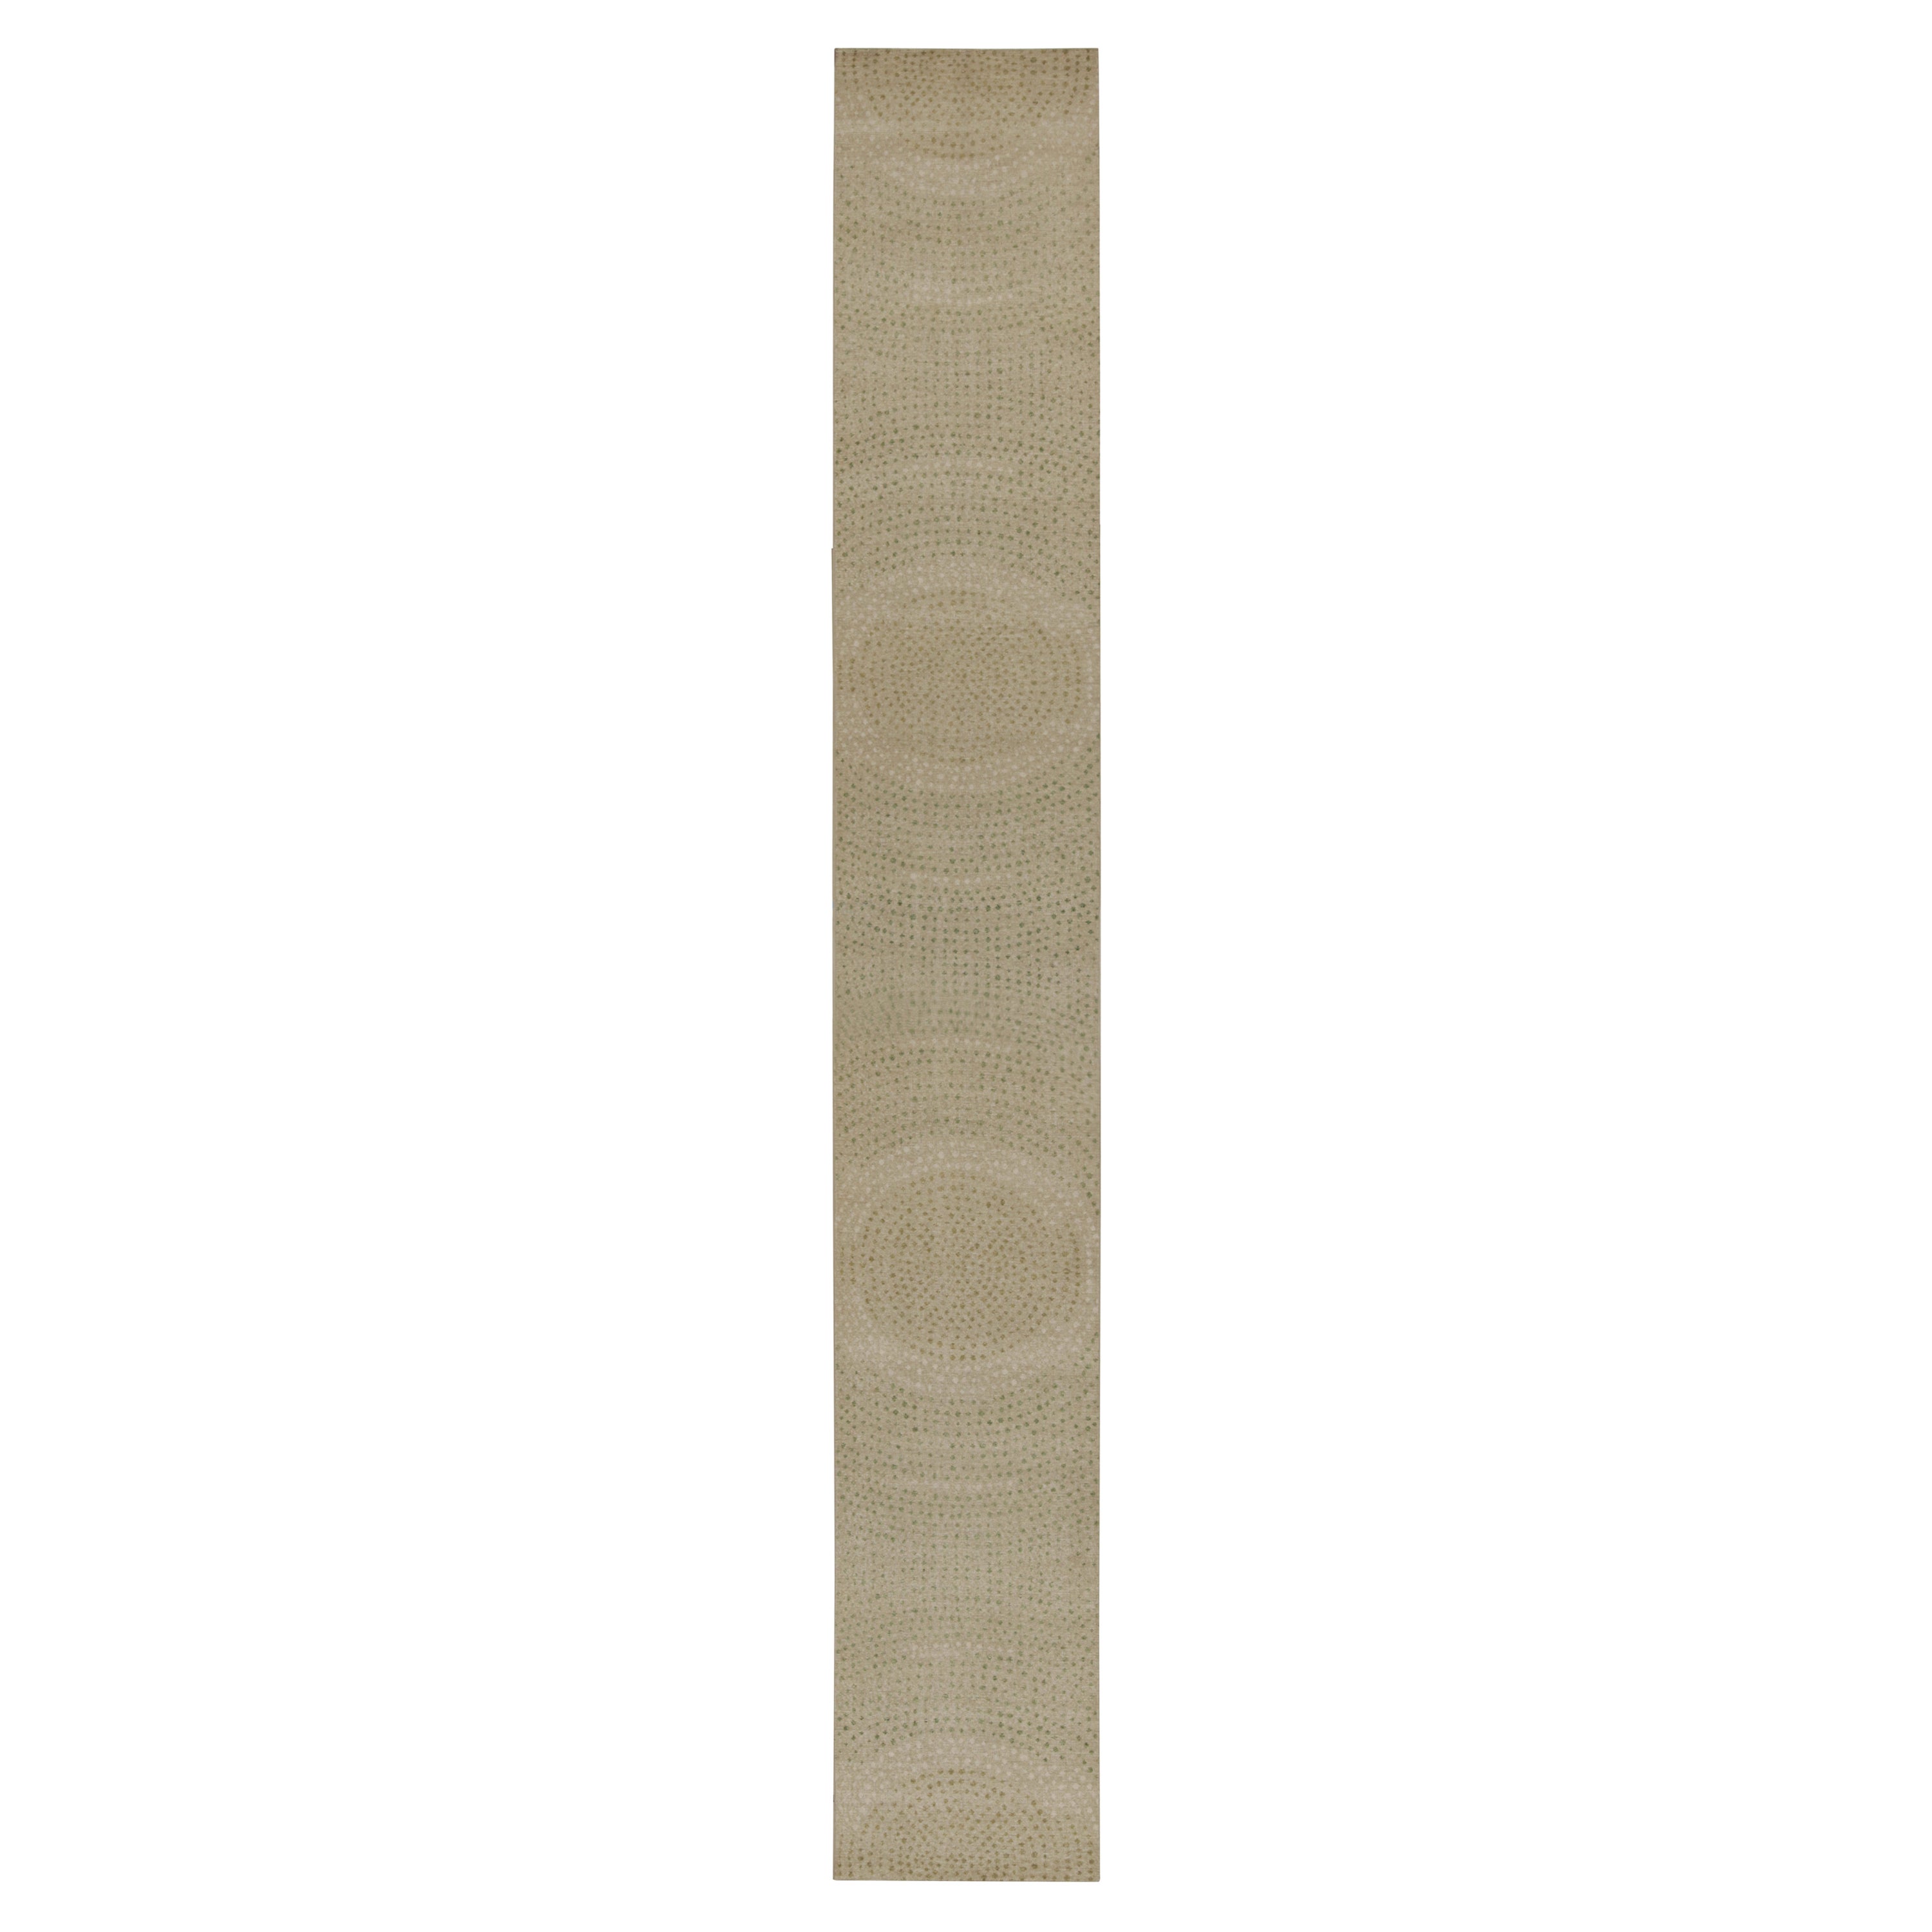 Rug & Kilim’s Distressed Style Extra-Long Runner in Beige with Green Dot Pattern For Sale